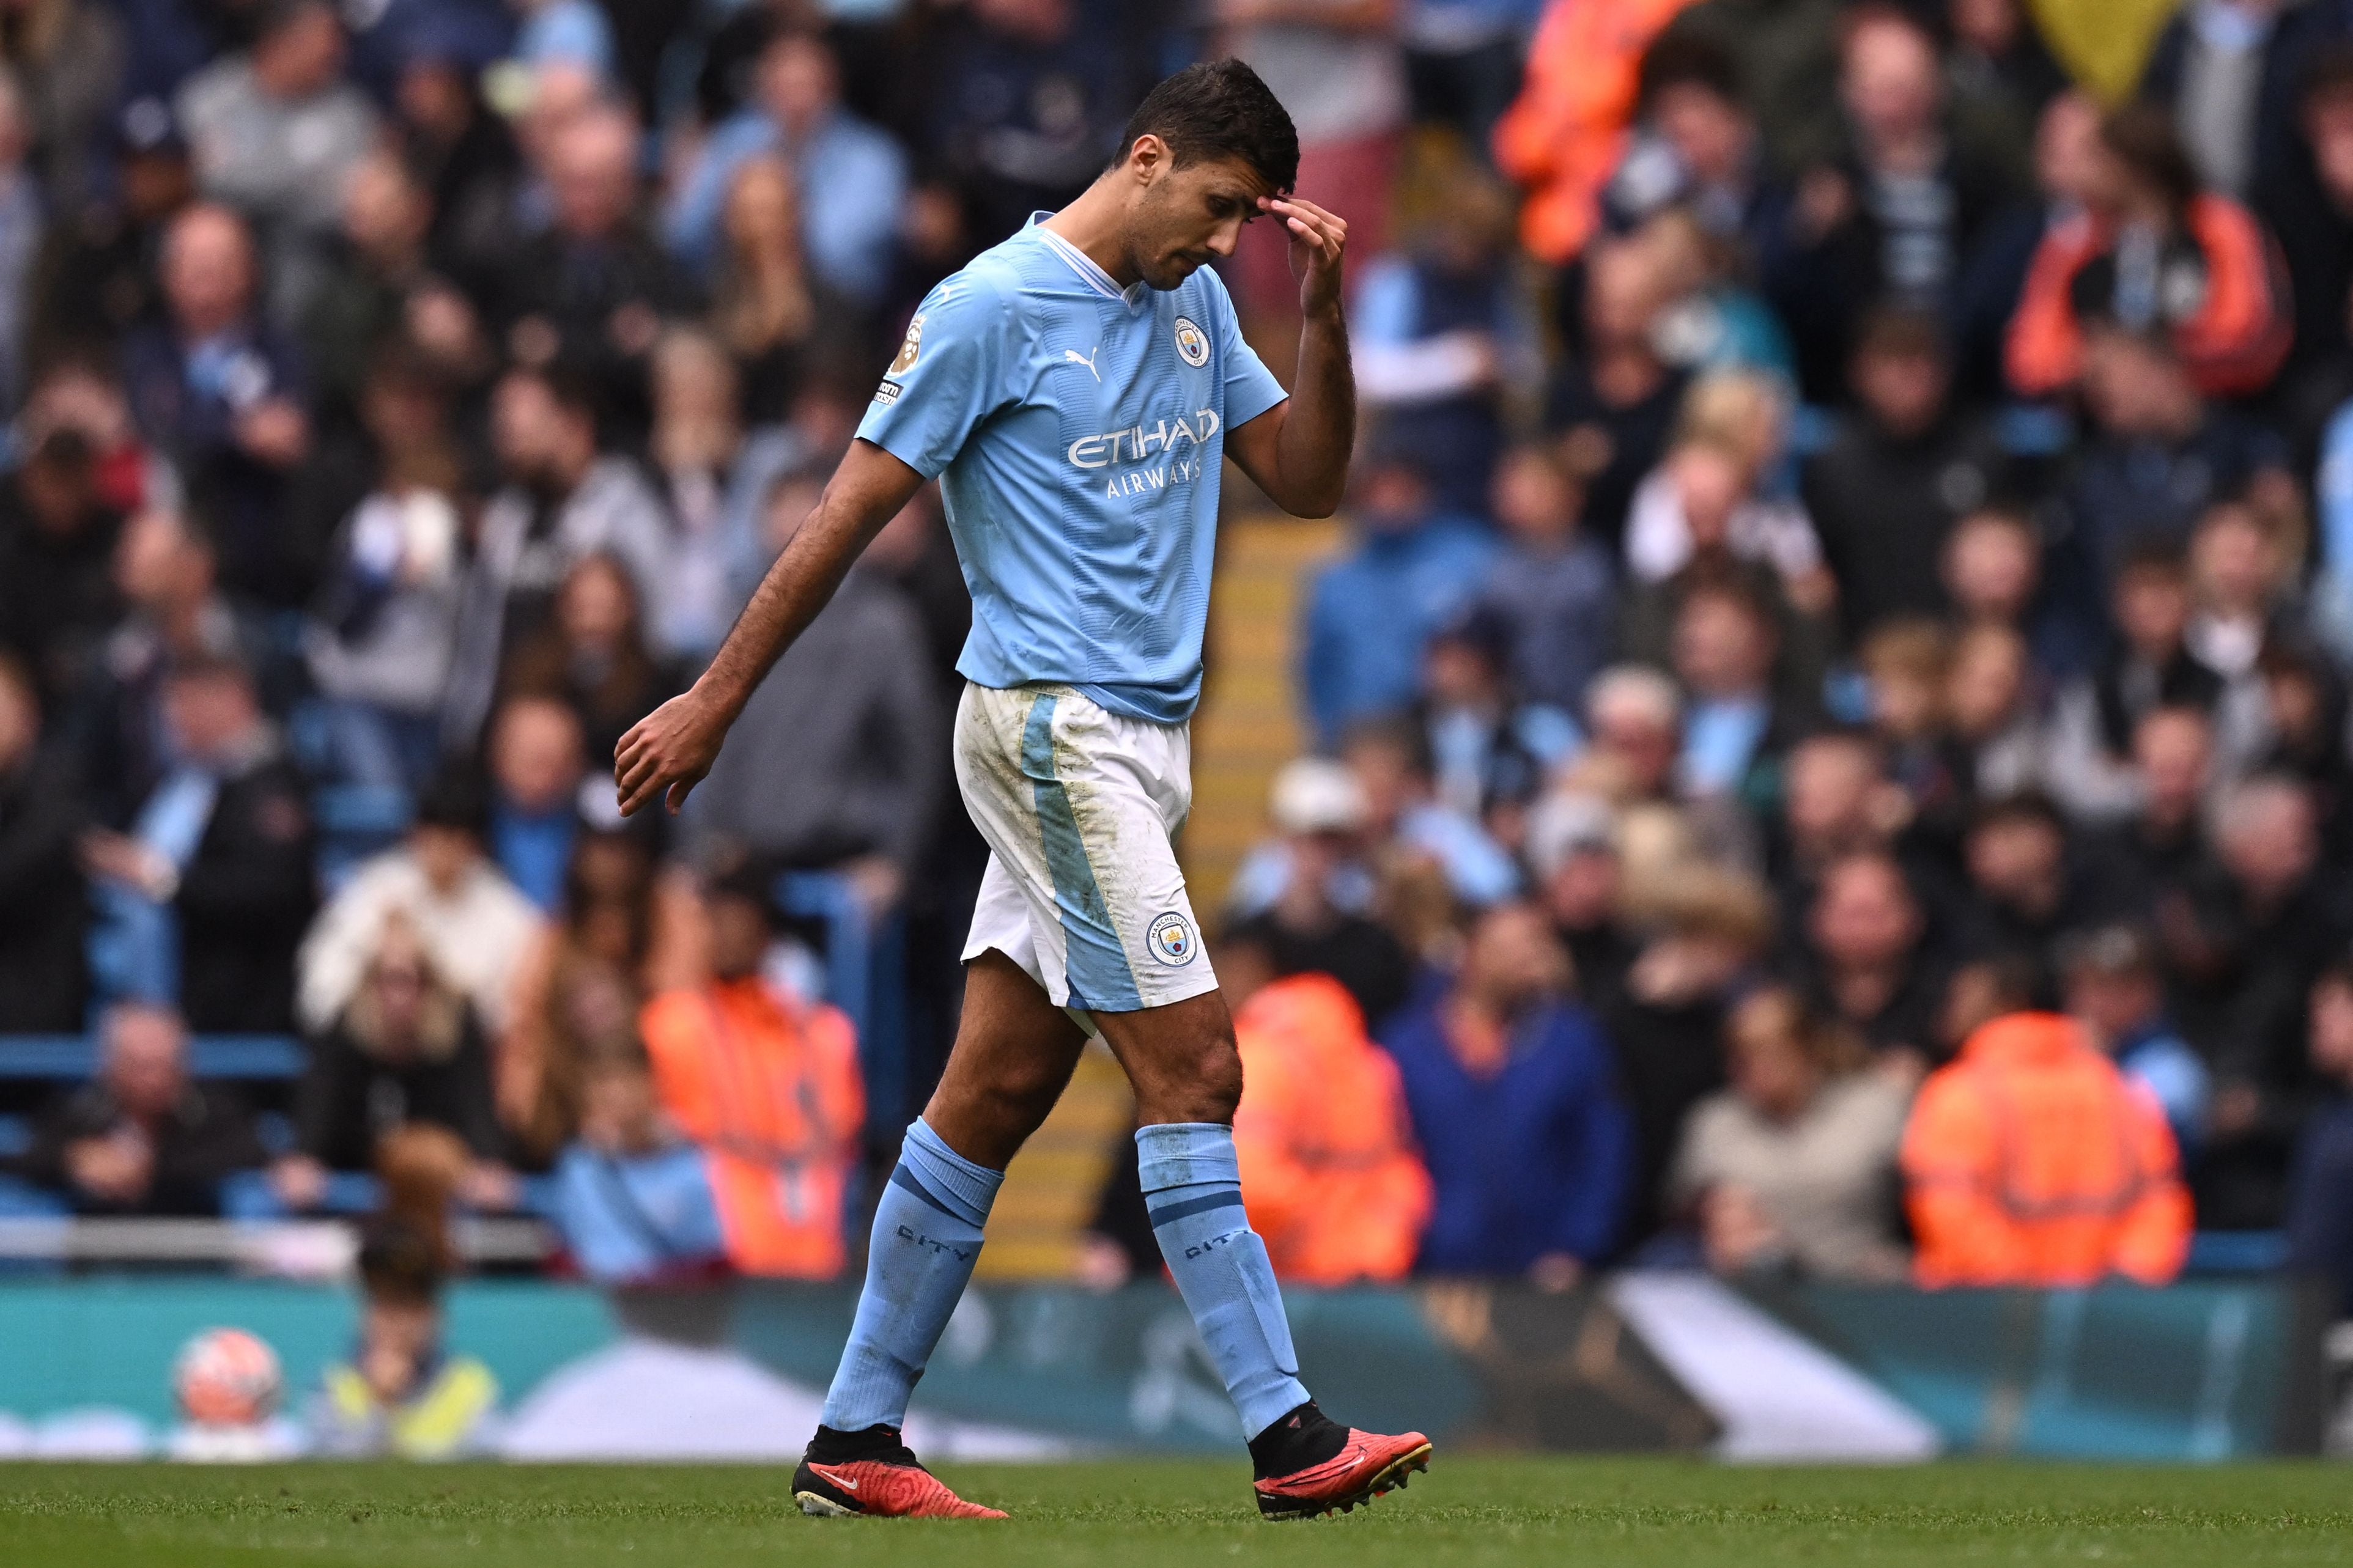 Rodri was sent off during Man City’s clash with Nottingham Forest